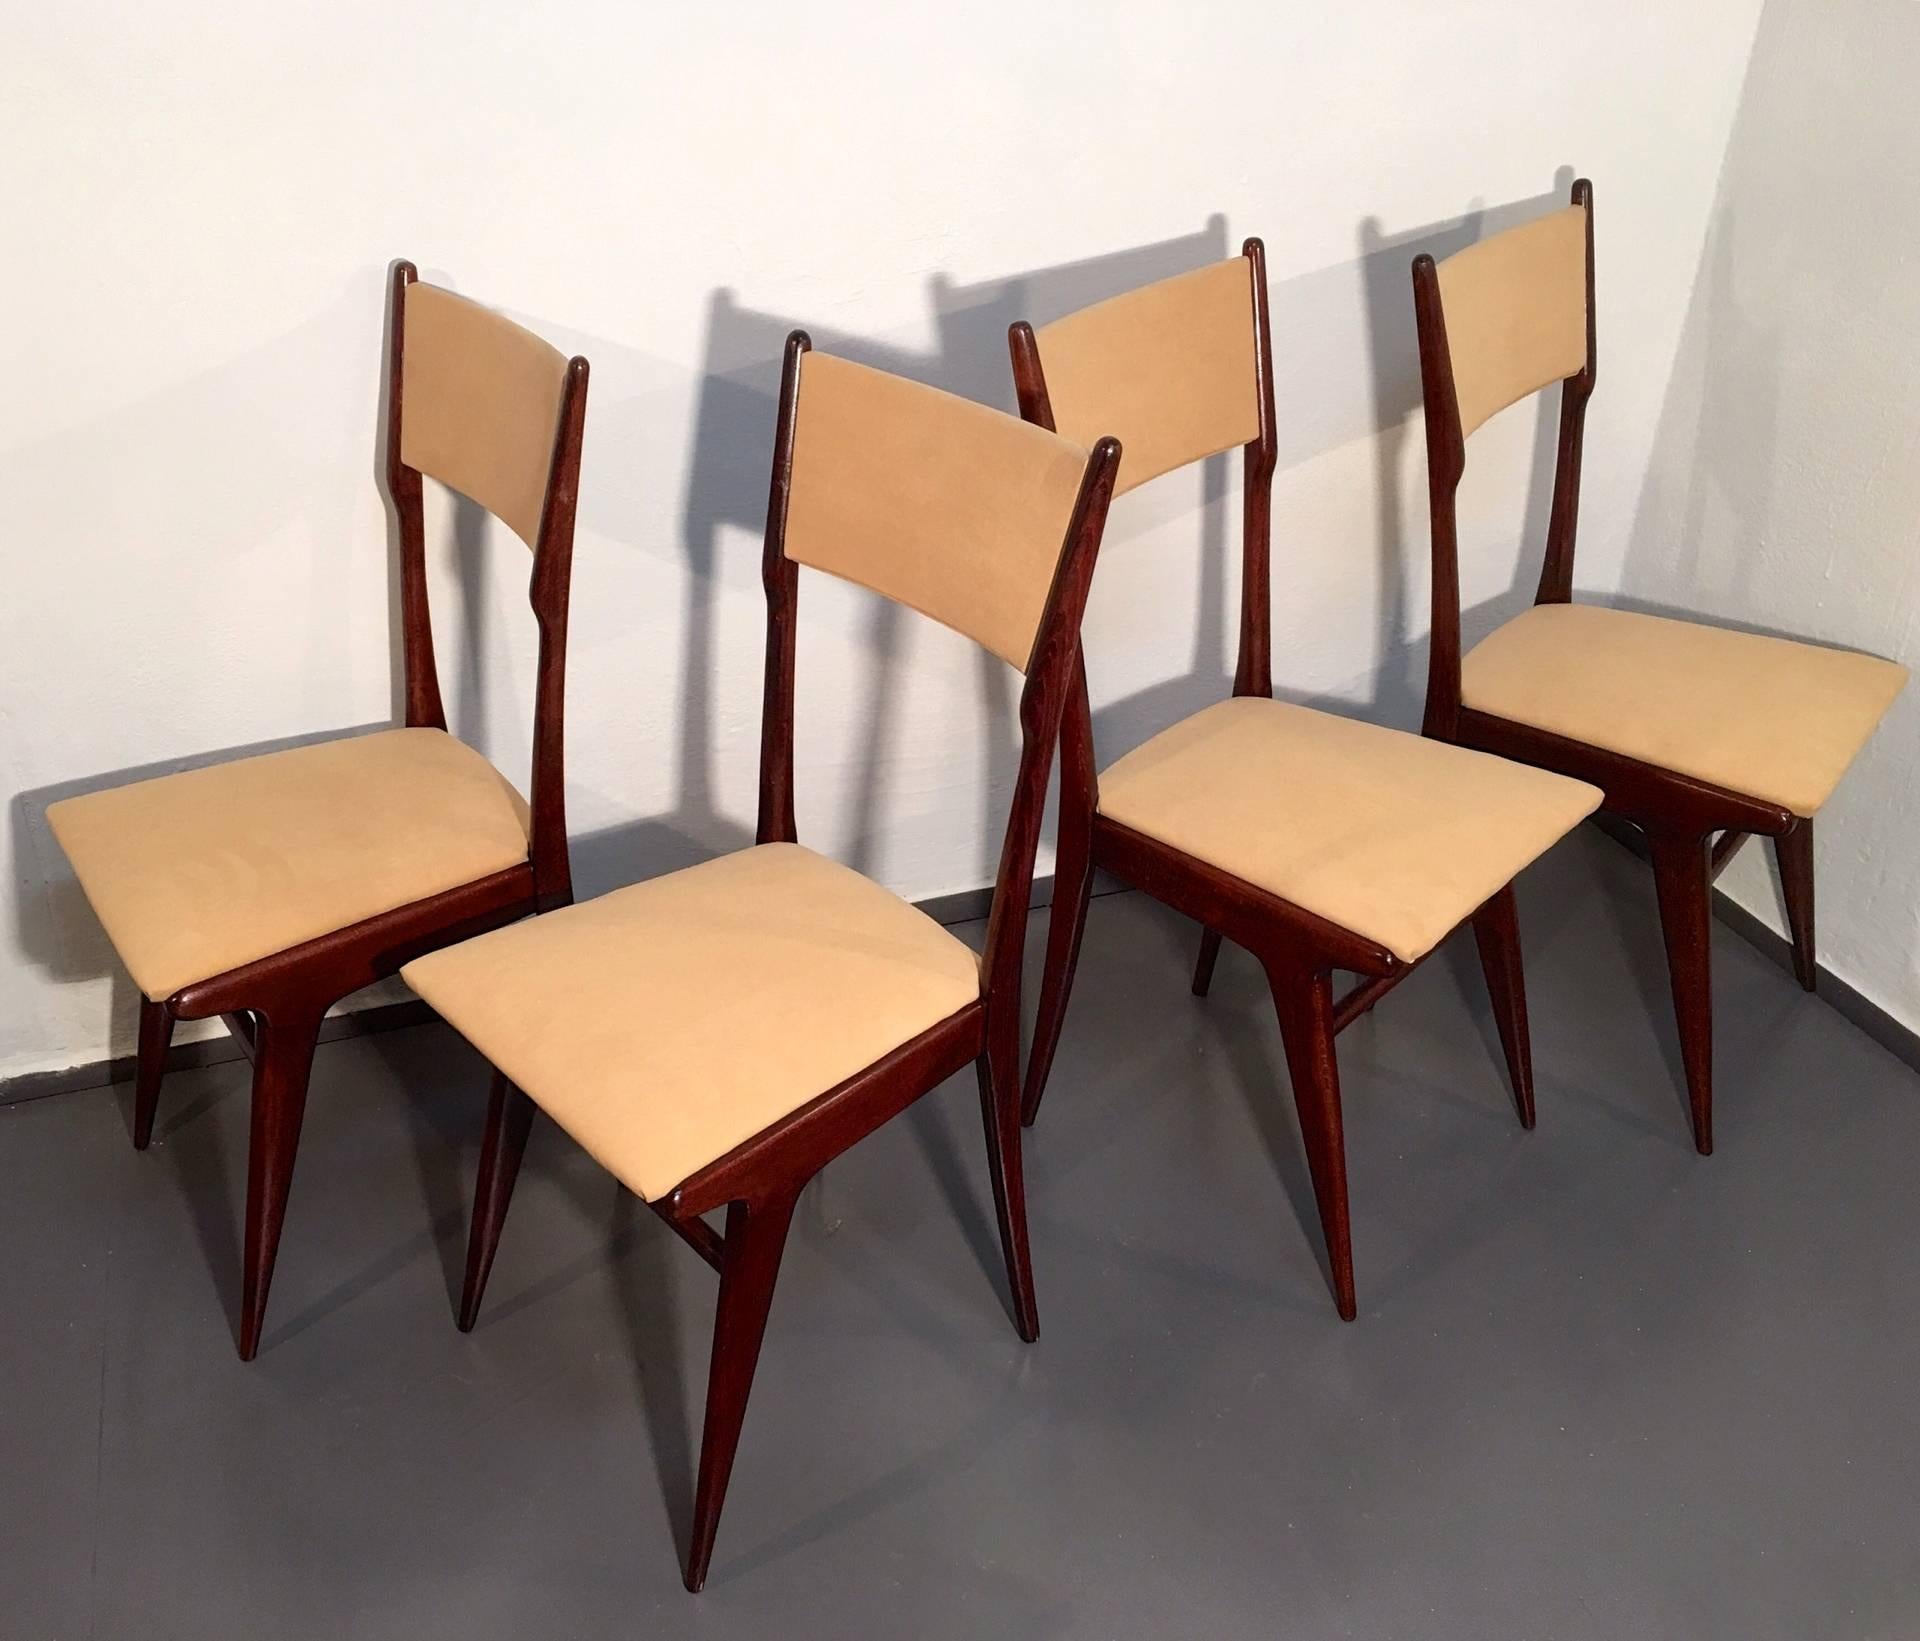 Wonderful set of Italian Mid-Century dining chairs upholstered in camel colored alcantara. Very subtitle features and elegant lining. Dark colored beech frame.